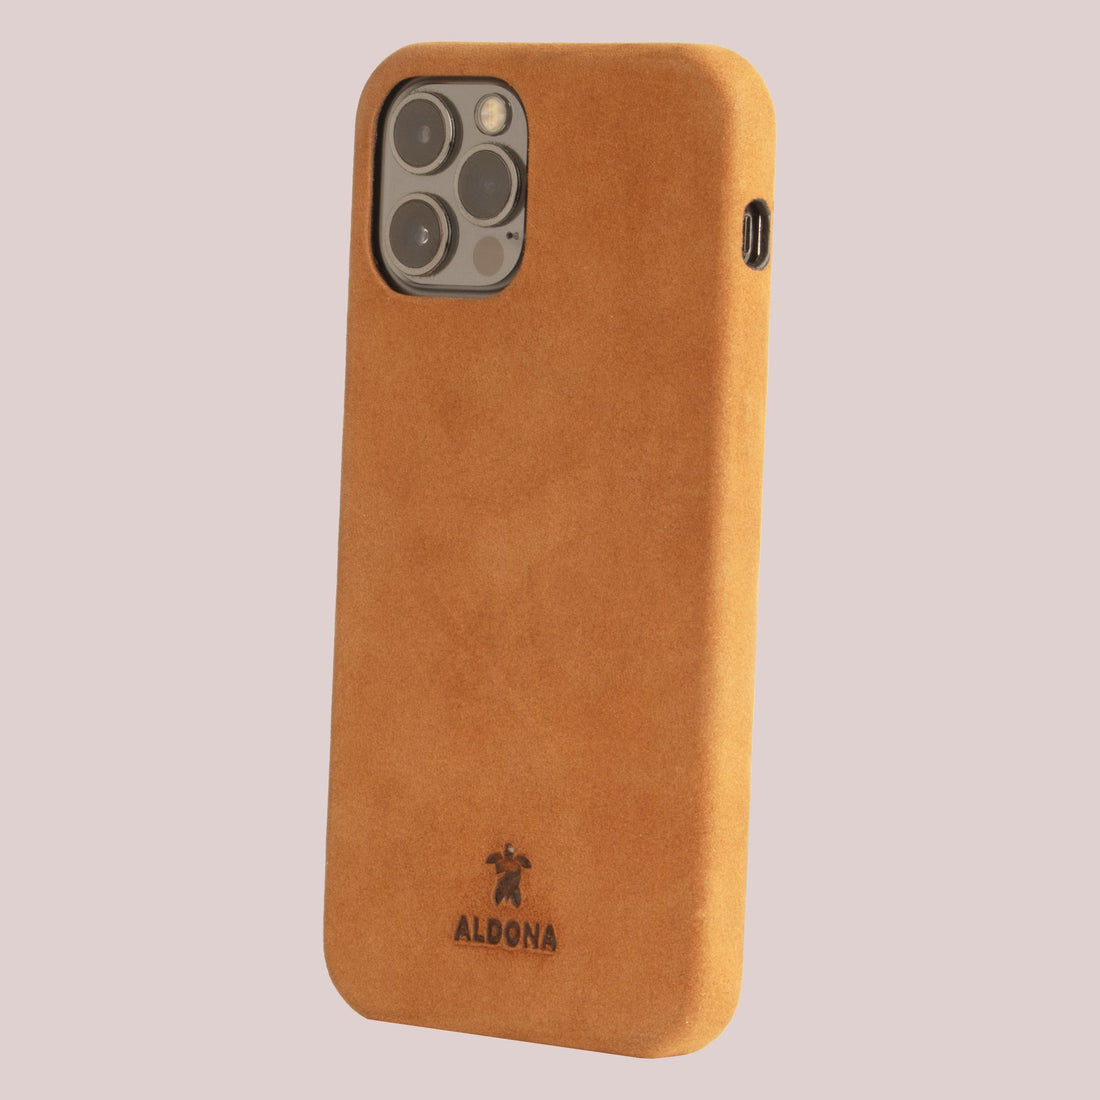 Kalon Case for iPhone 14 Pro Max with MagSafe Compatibility - Vintage Tan